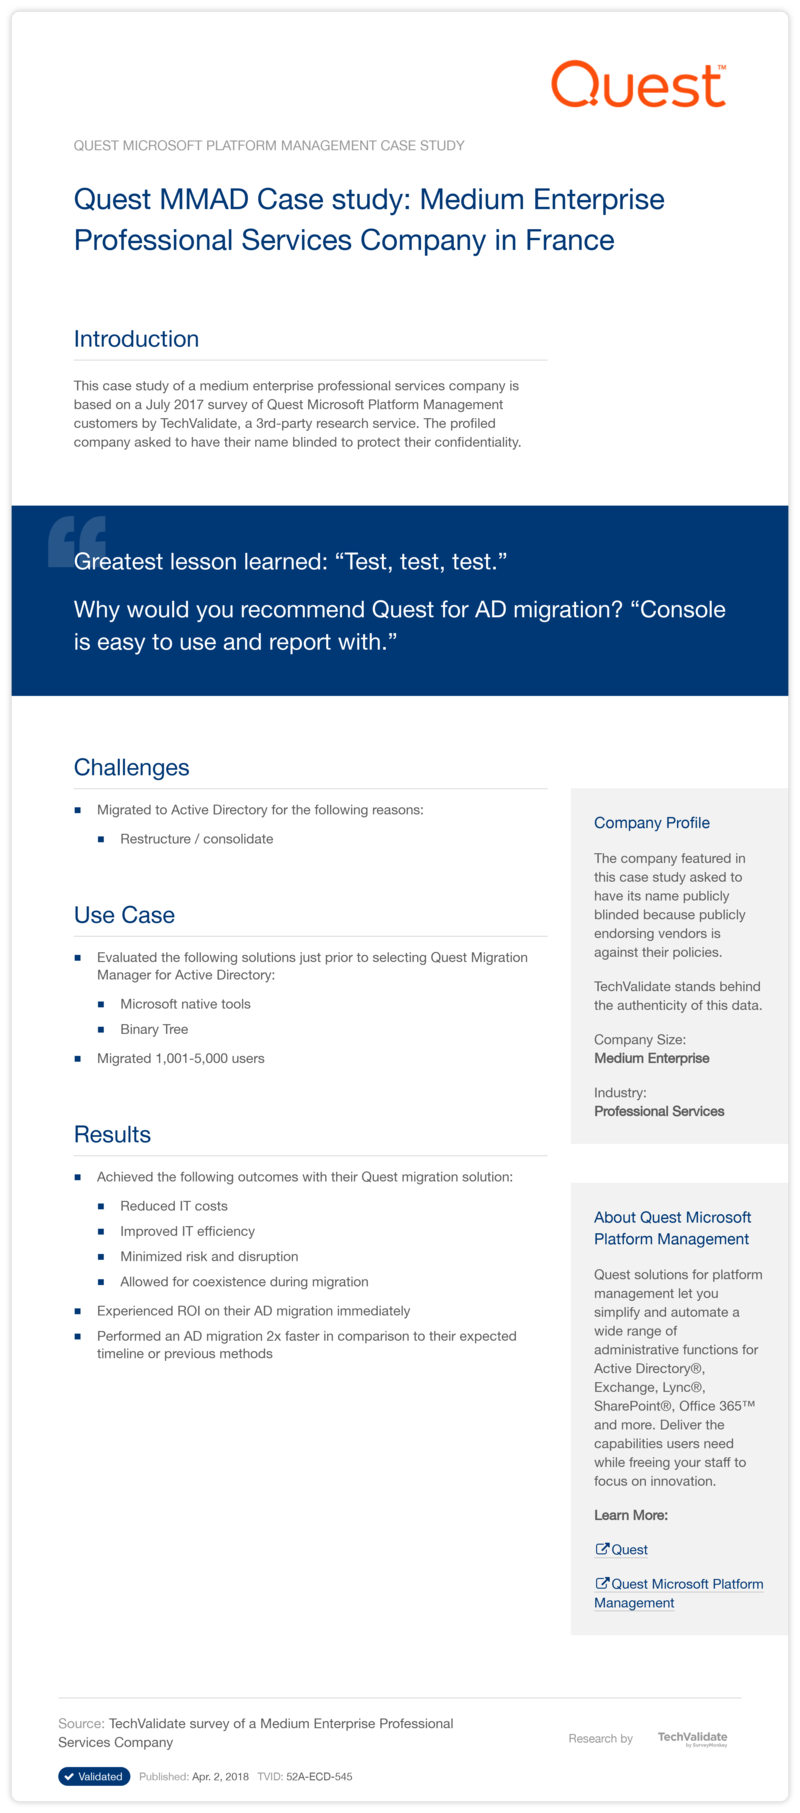 Quest MMAD Case study: Medium Enterprise Professional Services Company in France